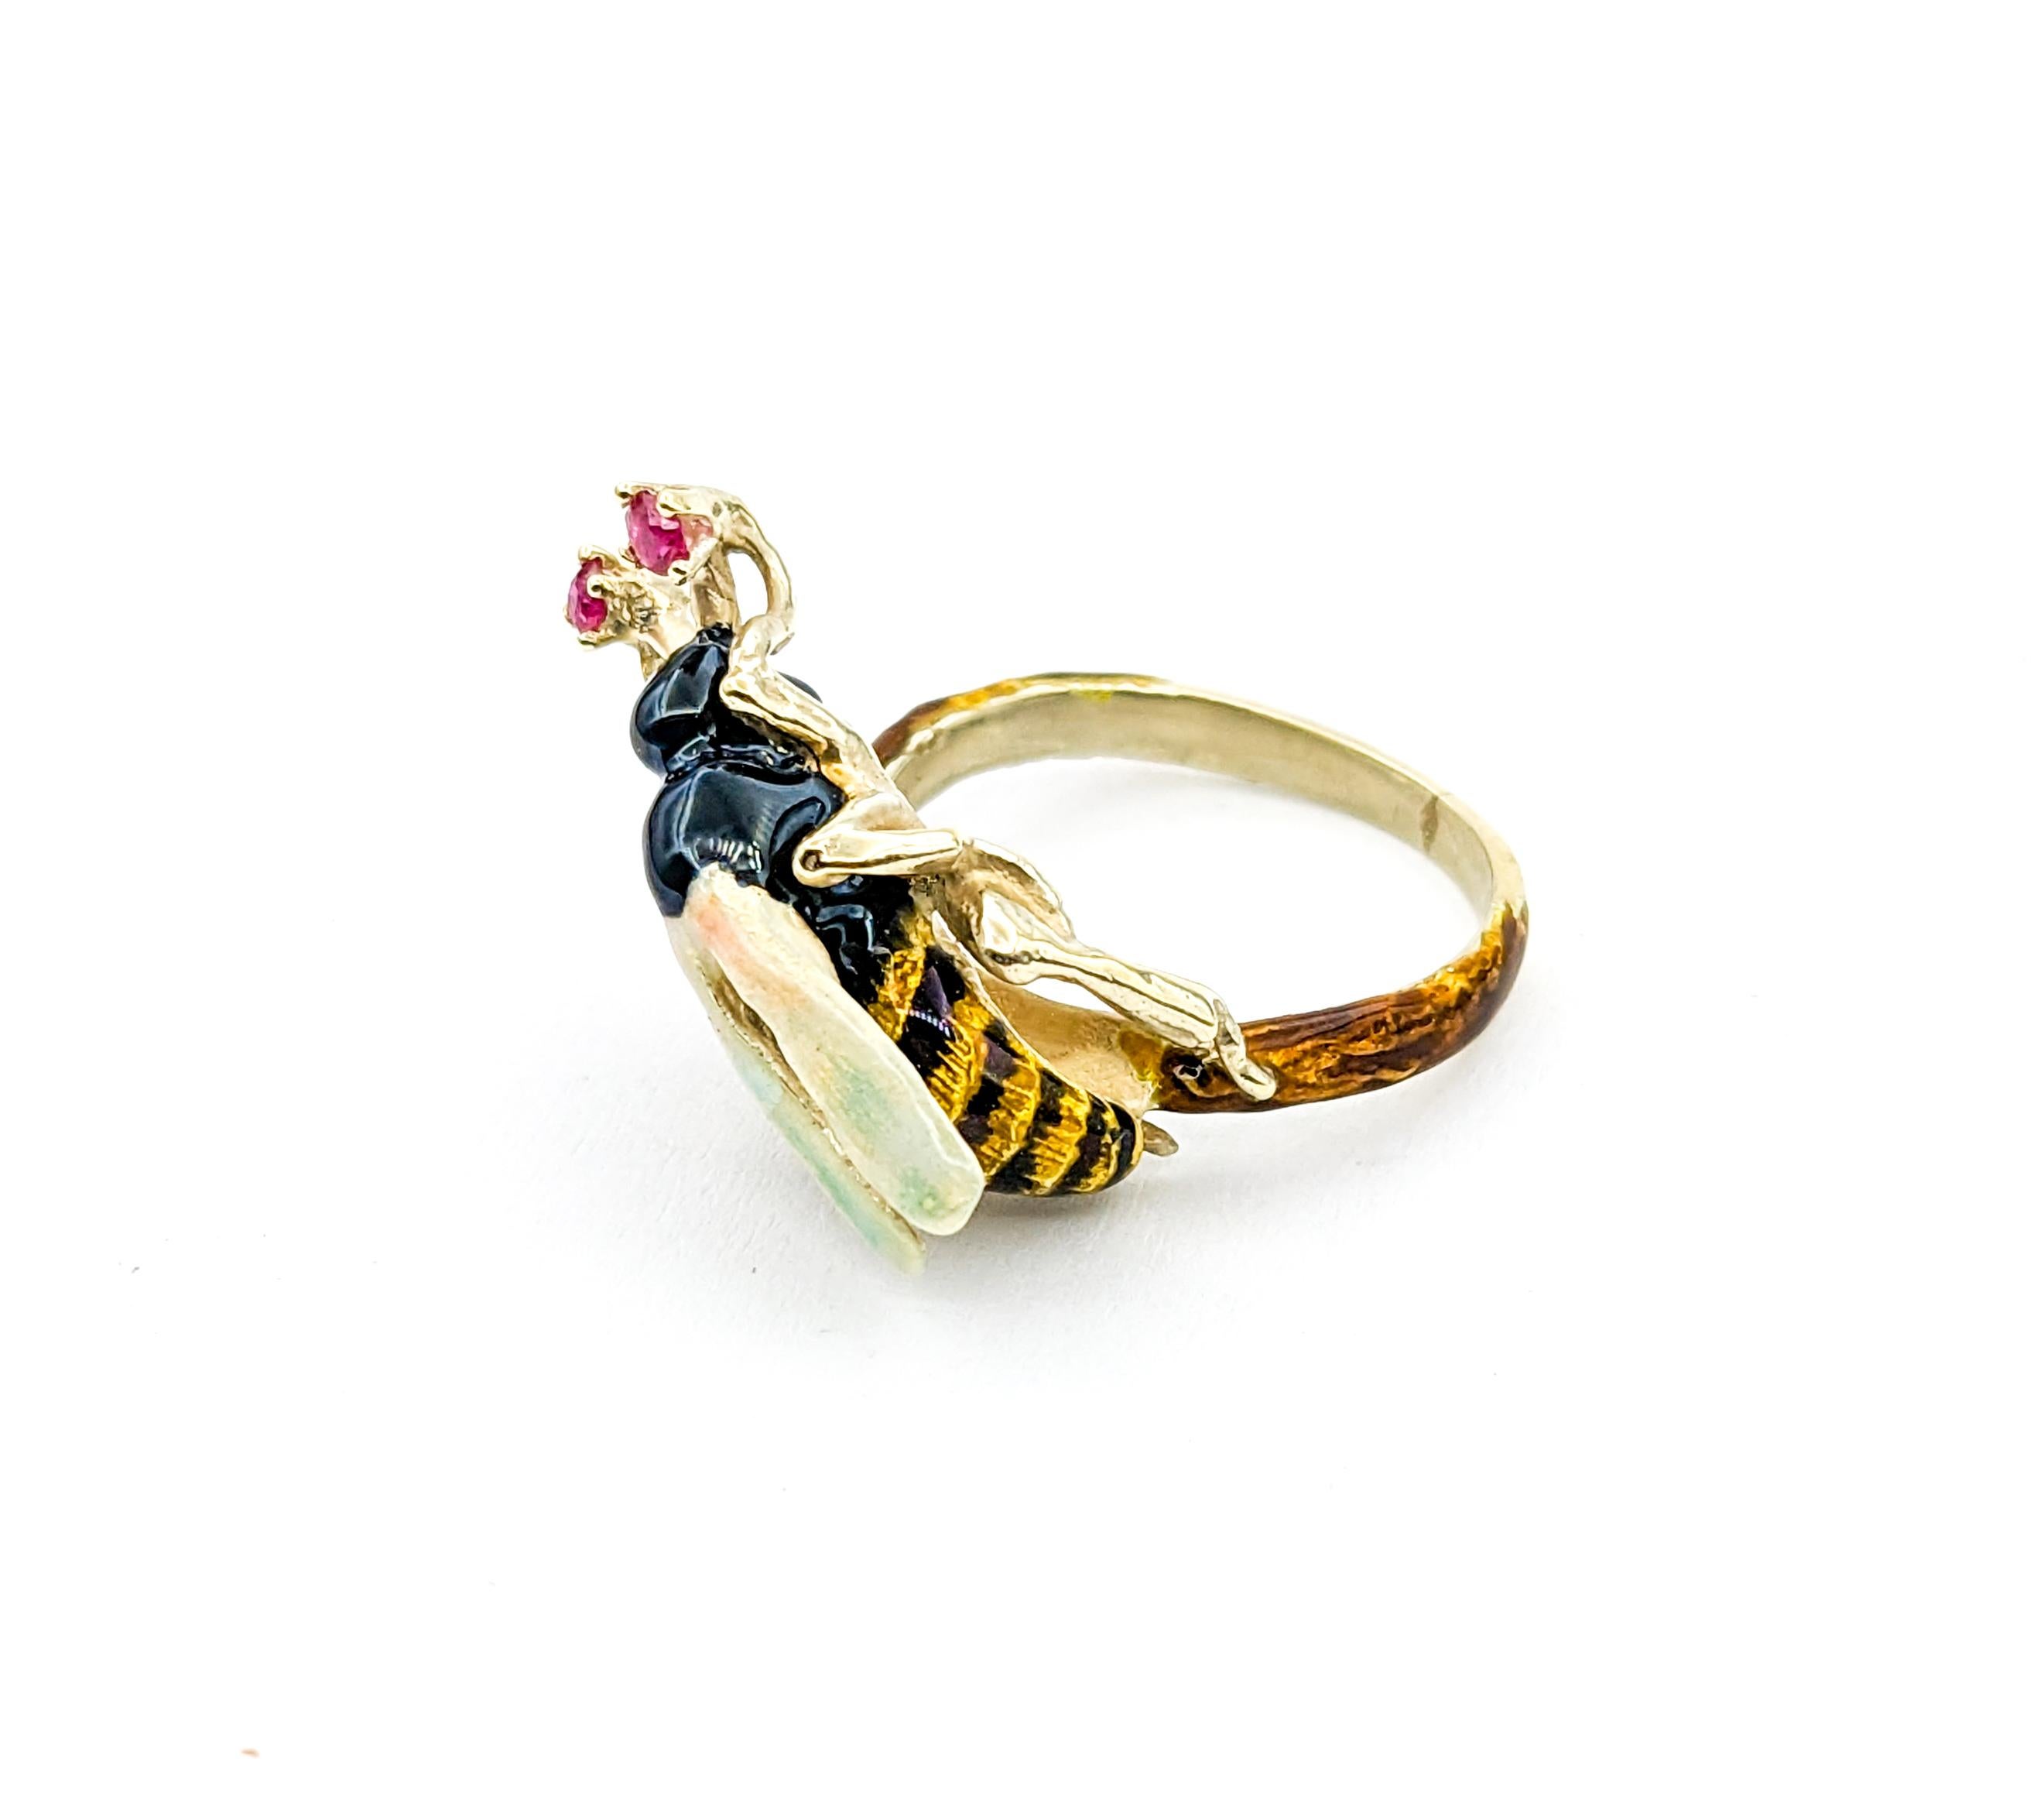 Vintage Figural Enamel Wasp Insect Ring with Rubies In Yellow Gold In Excellent Condition For Sale In Bloomington, MN